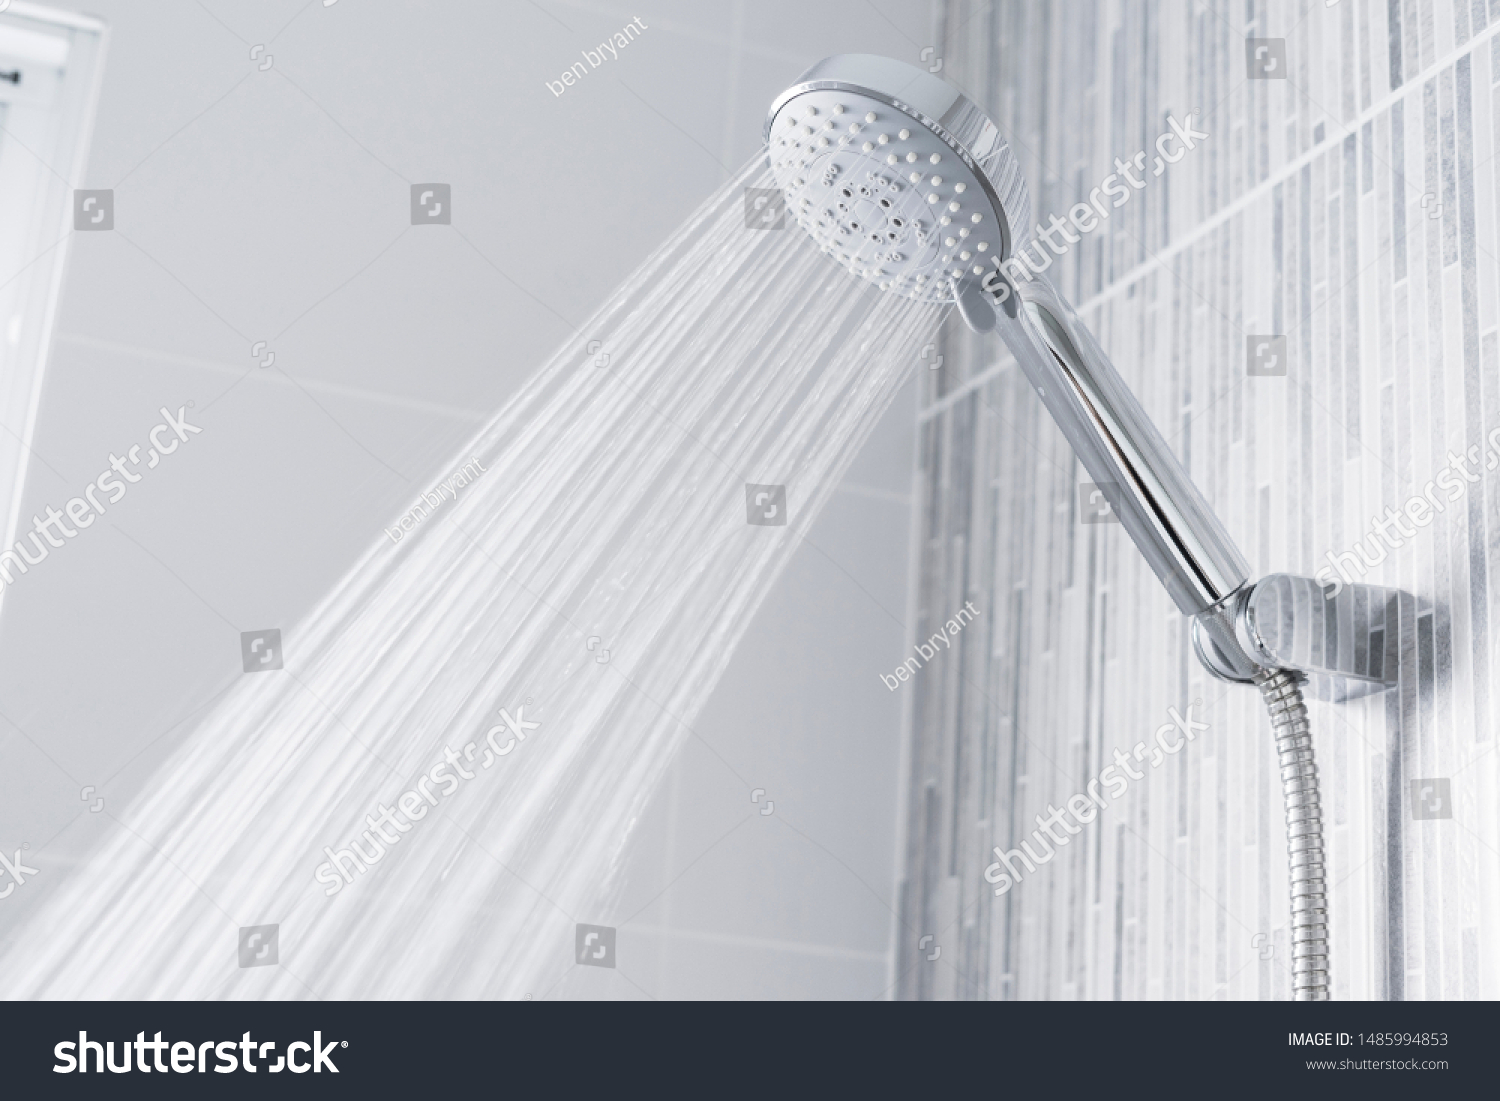 Fresh Shower Behind Wet Glass Window Stock Image Download Now